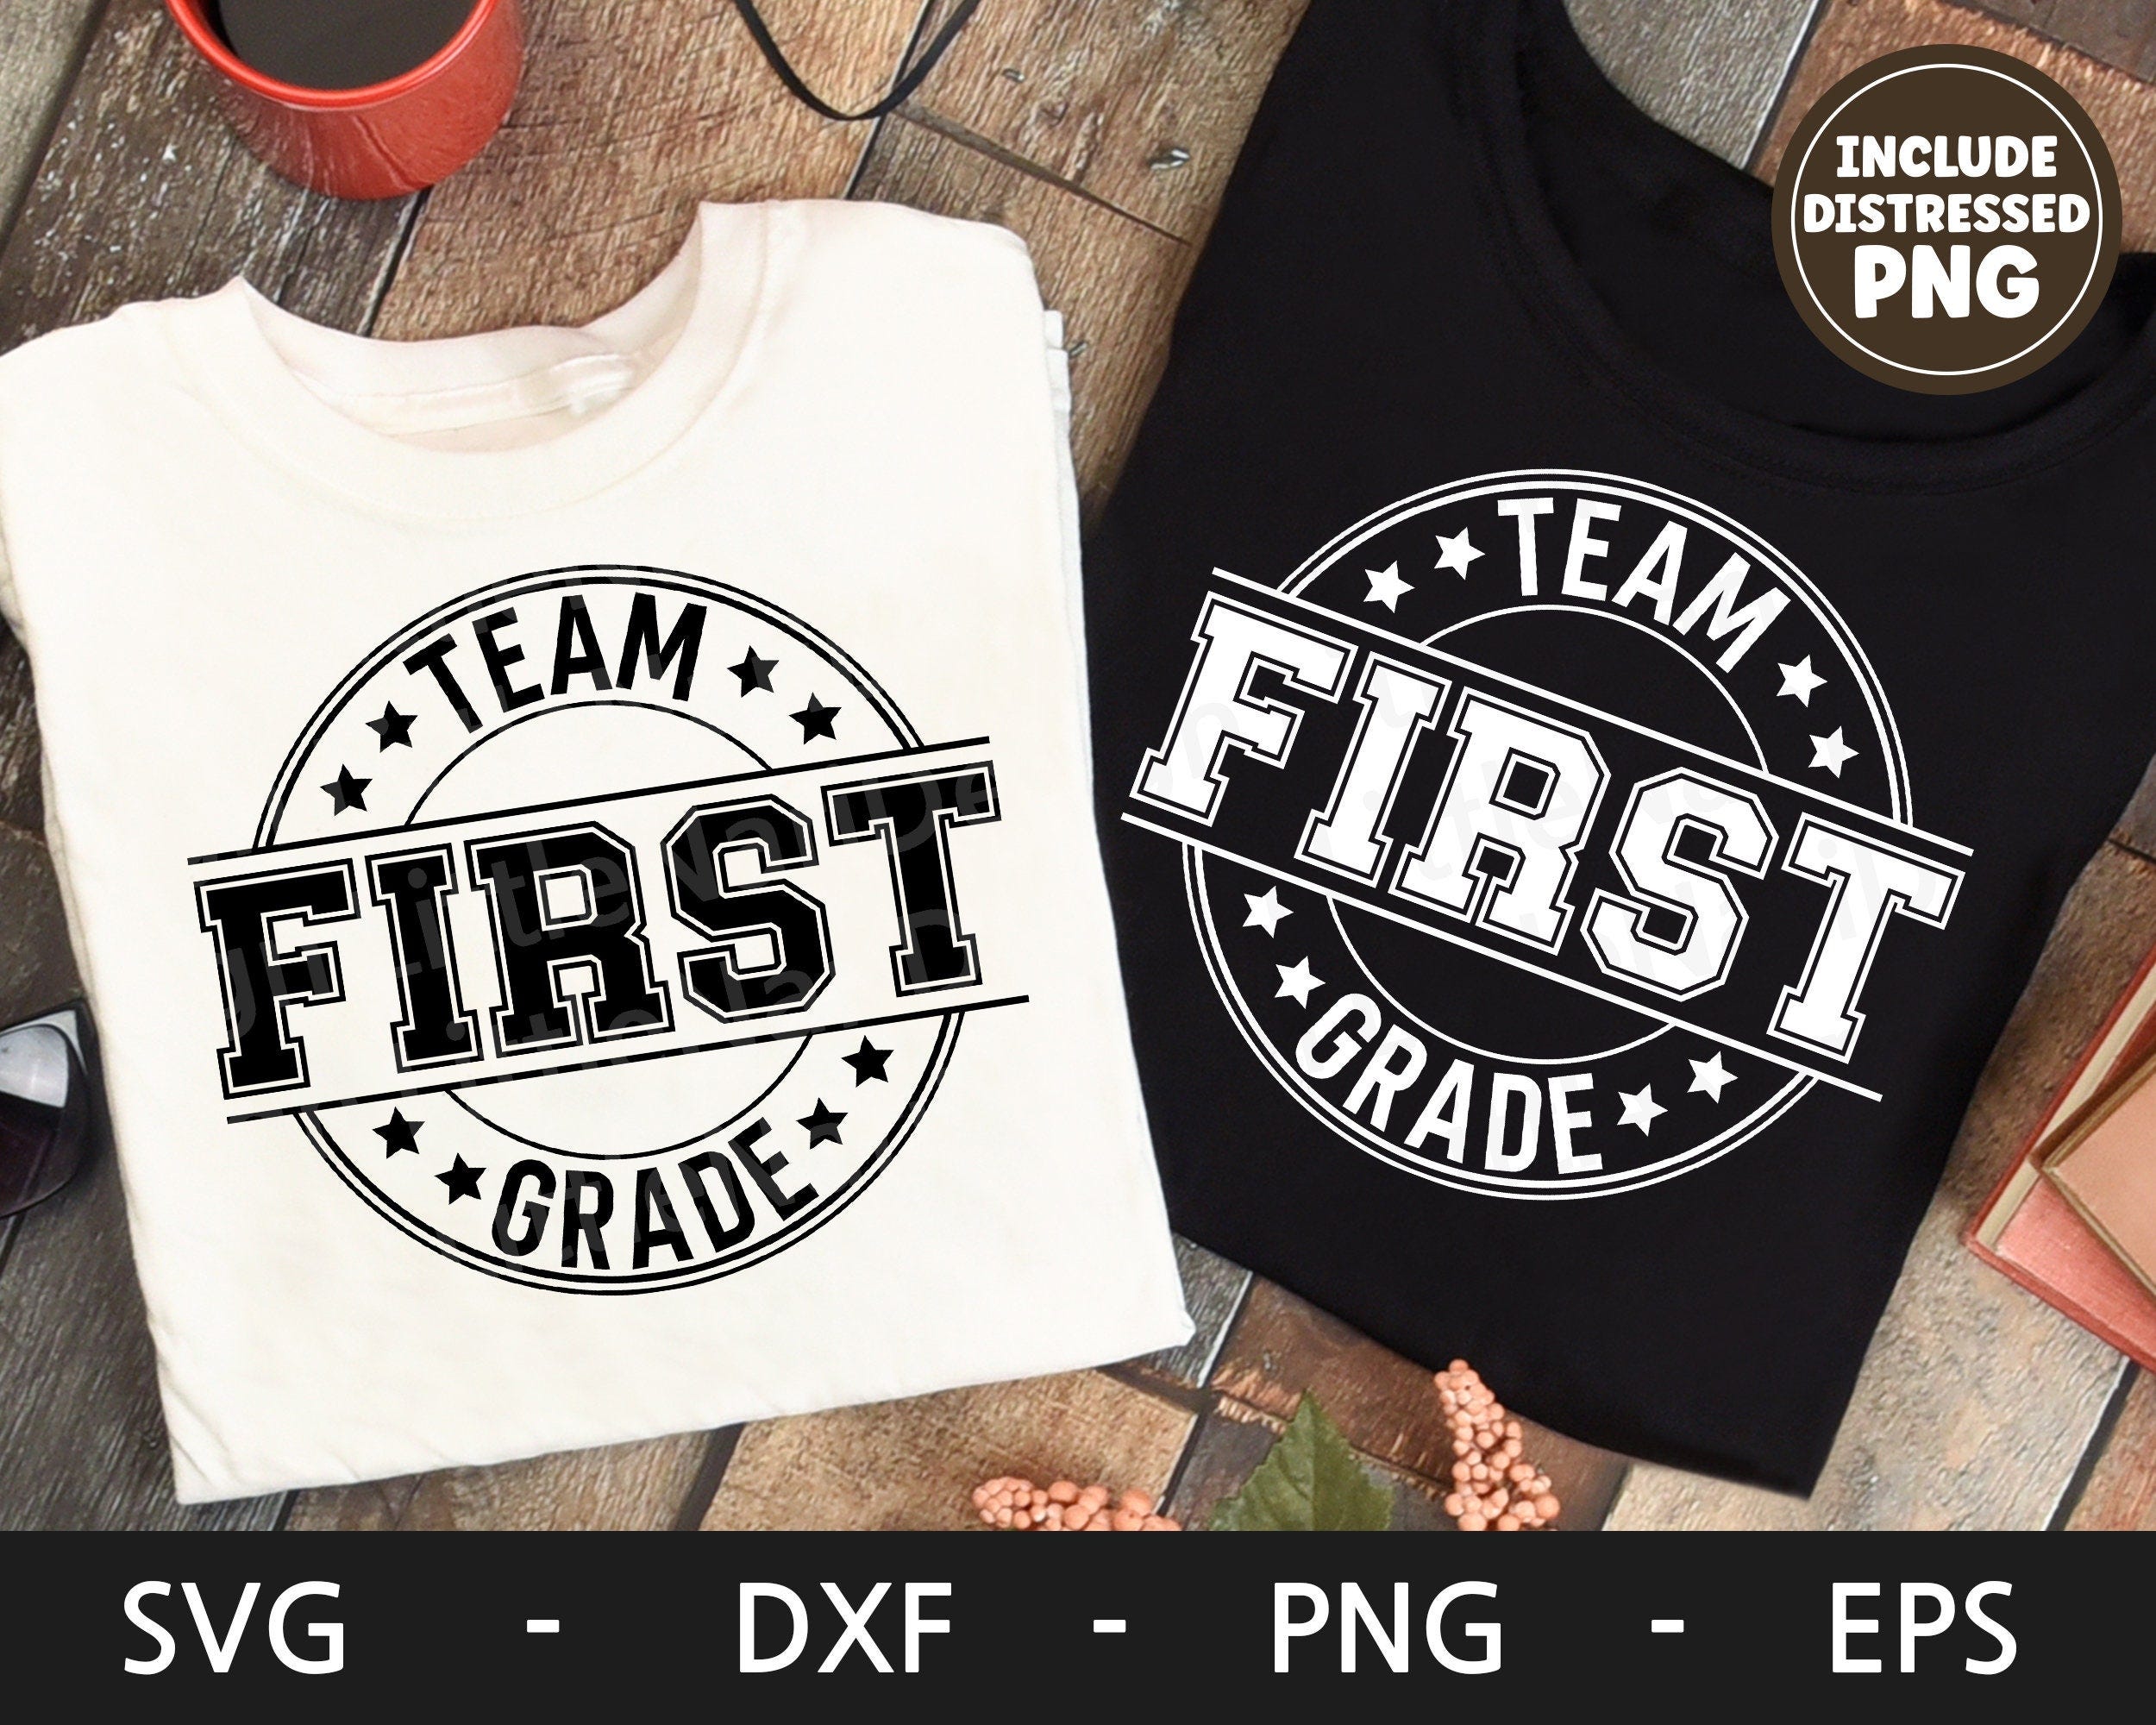 Team First Grade svg, First Day of School svg, Back to School svg,Teacher shirt, First Grade shirt, dxf, png, eps, svg files for cricut